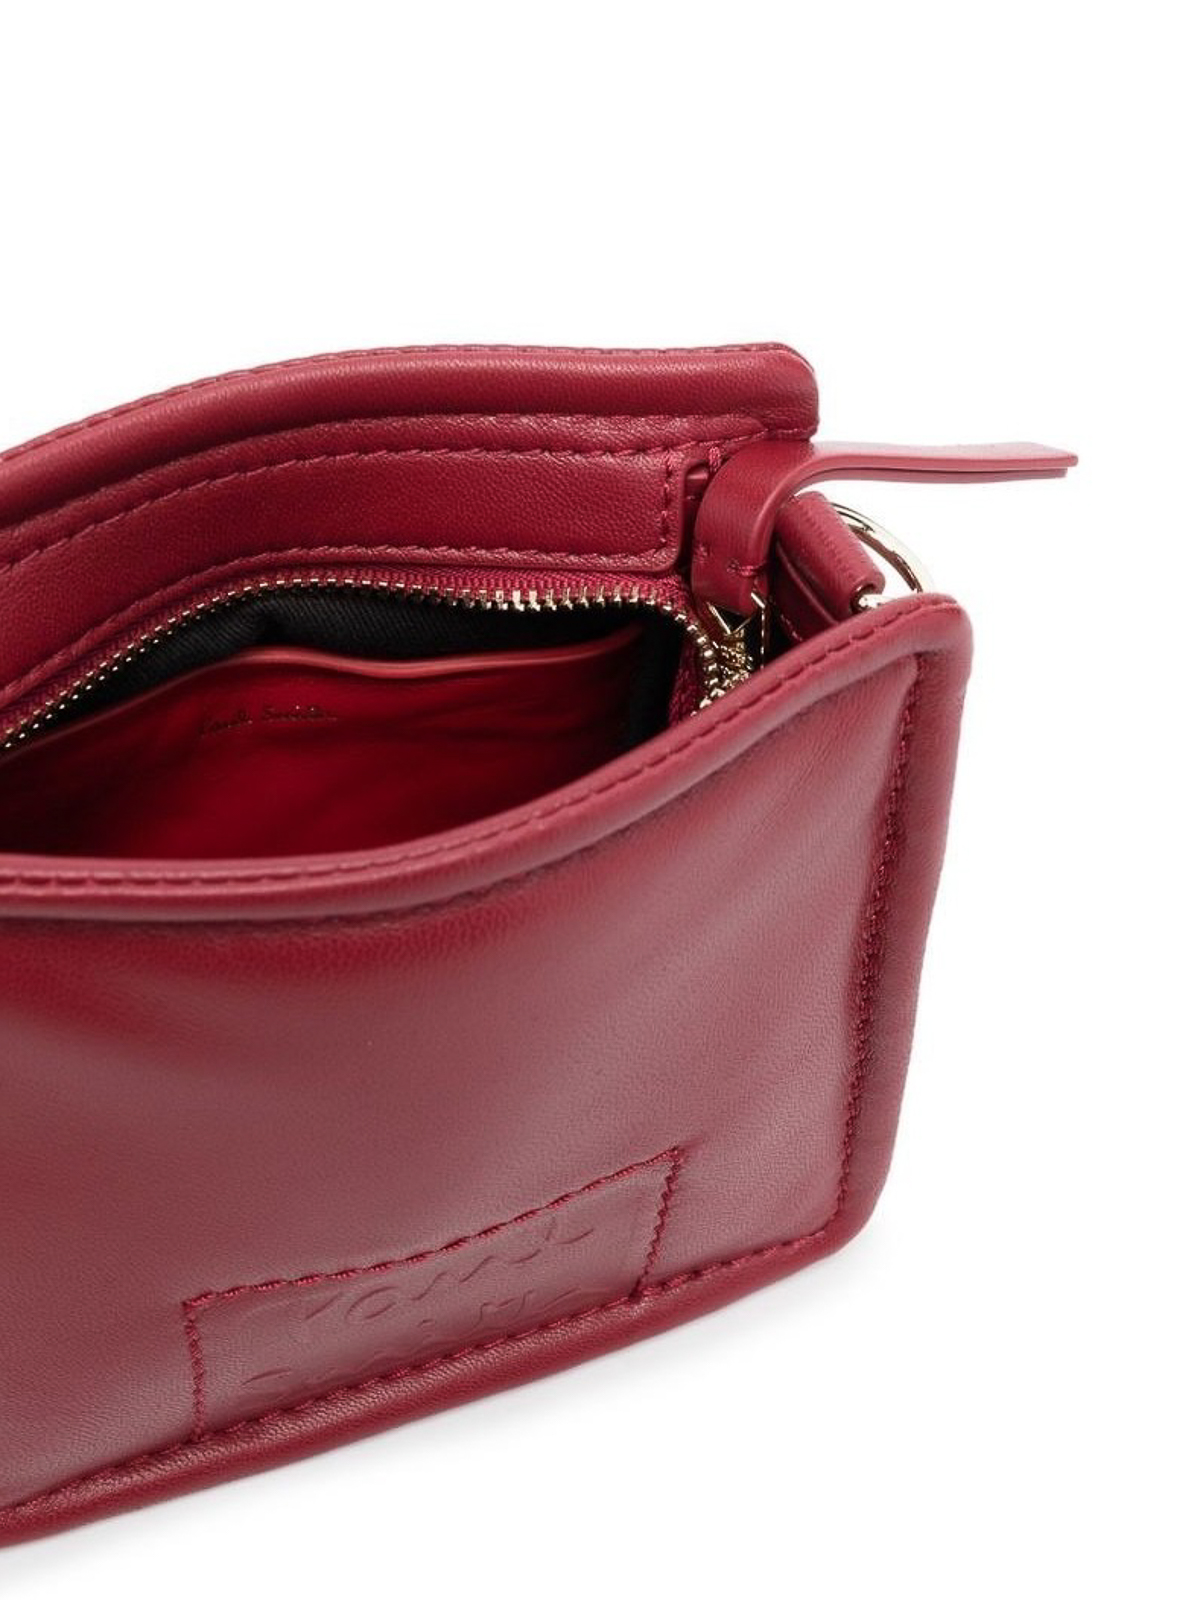 Paul Smith Bags & Handbags for Women for sale